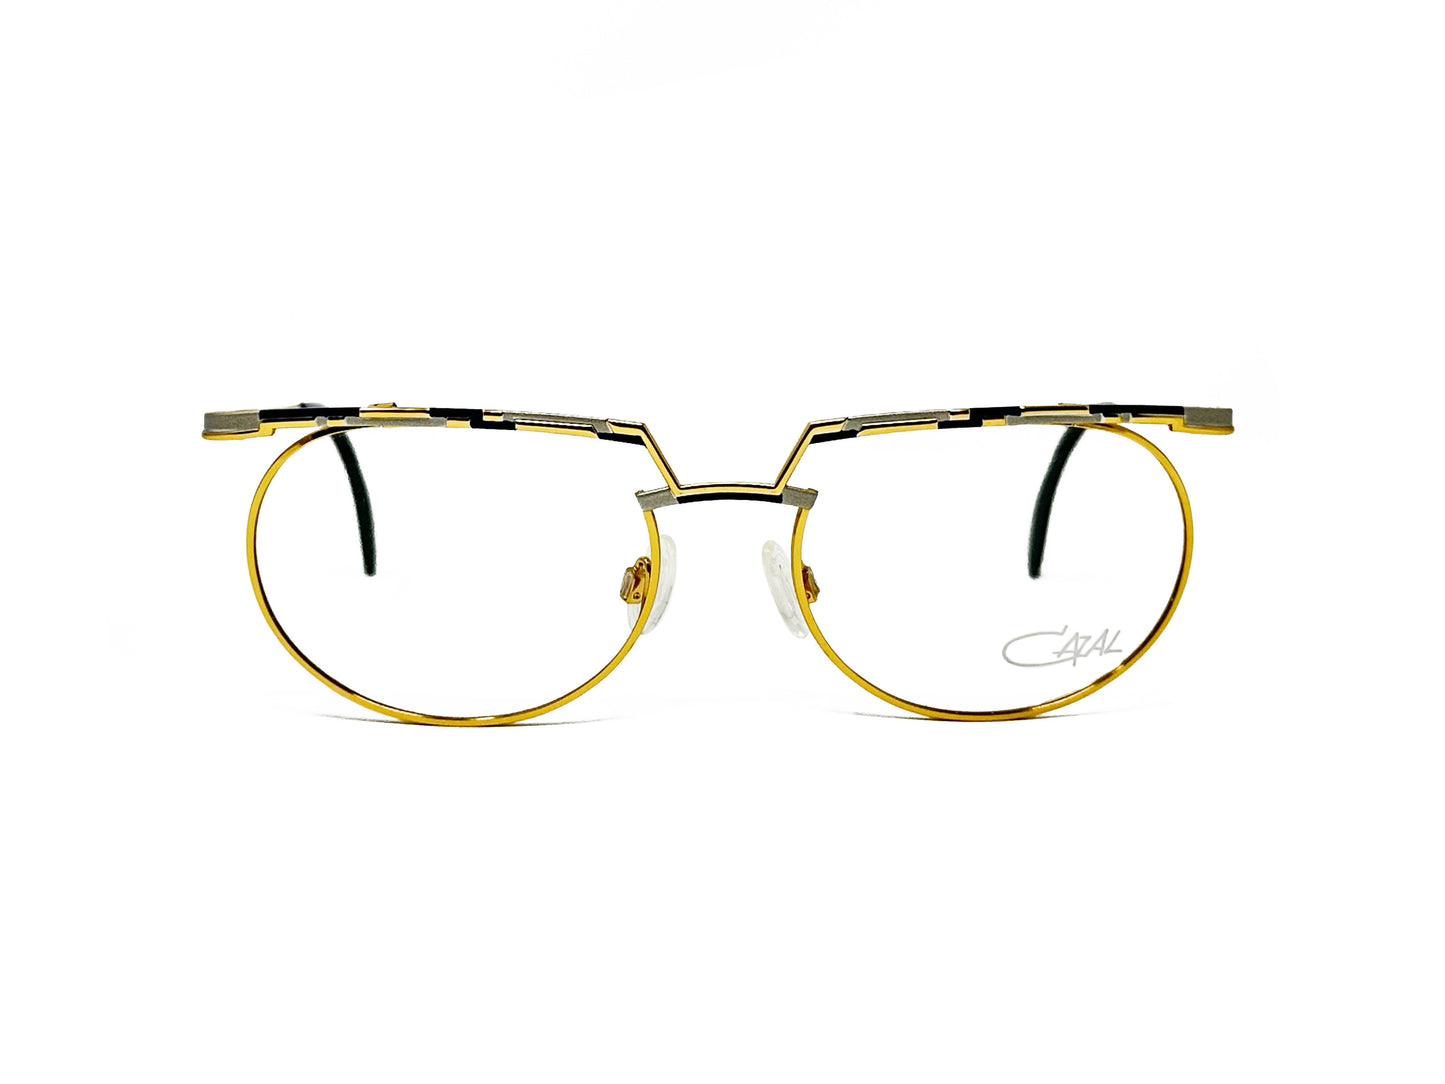 Cazal round, metal optical frame with straight bar across top. Model: 268. Color: 481 Gold. Front view. 